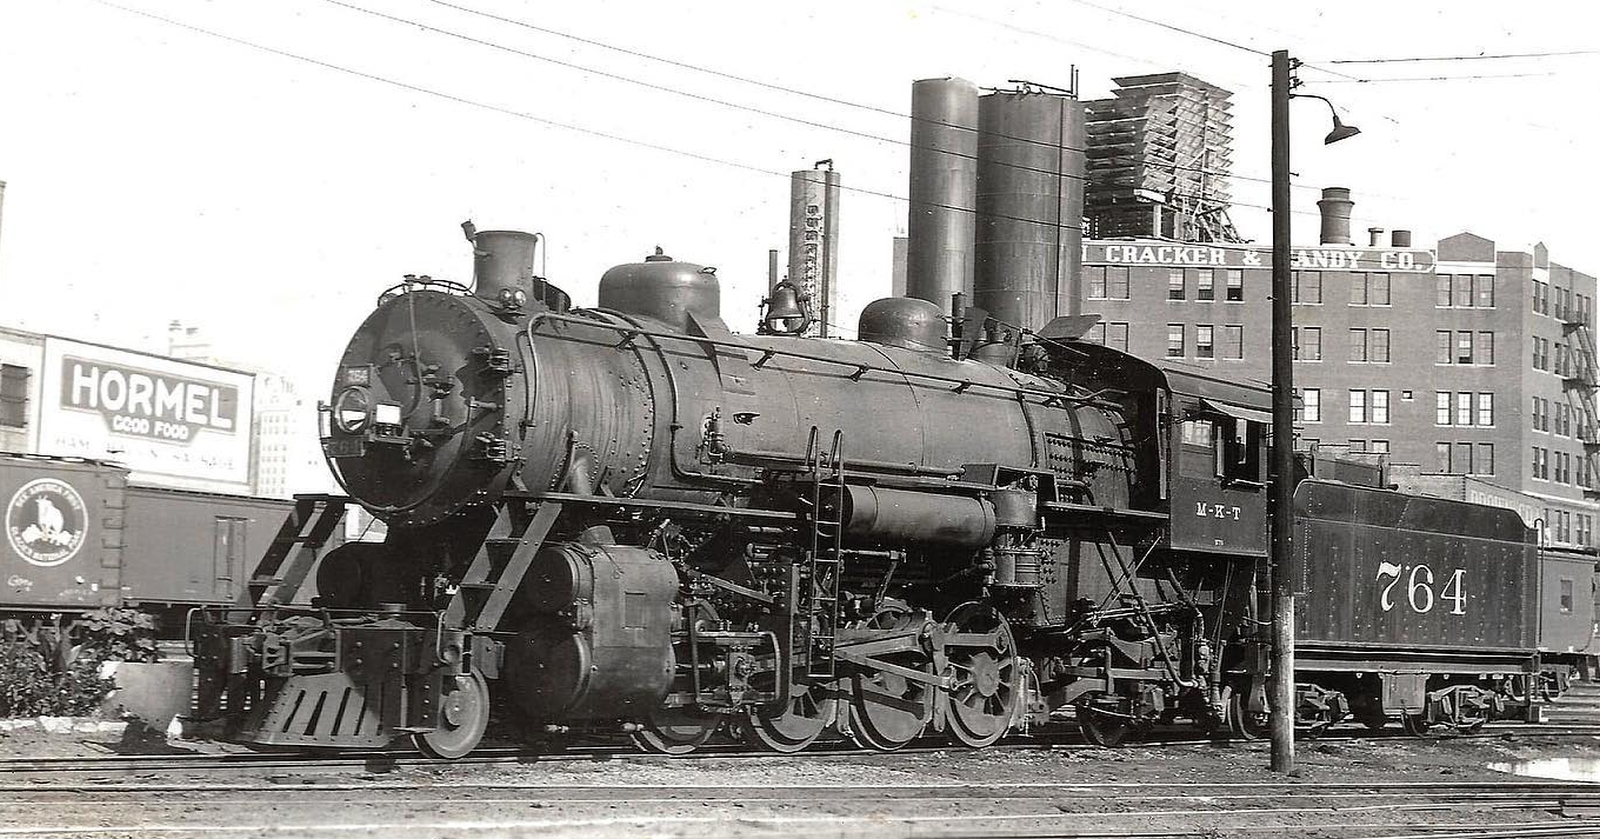 No. 764, one of the engines with baker valve gear in Dallas, Texas